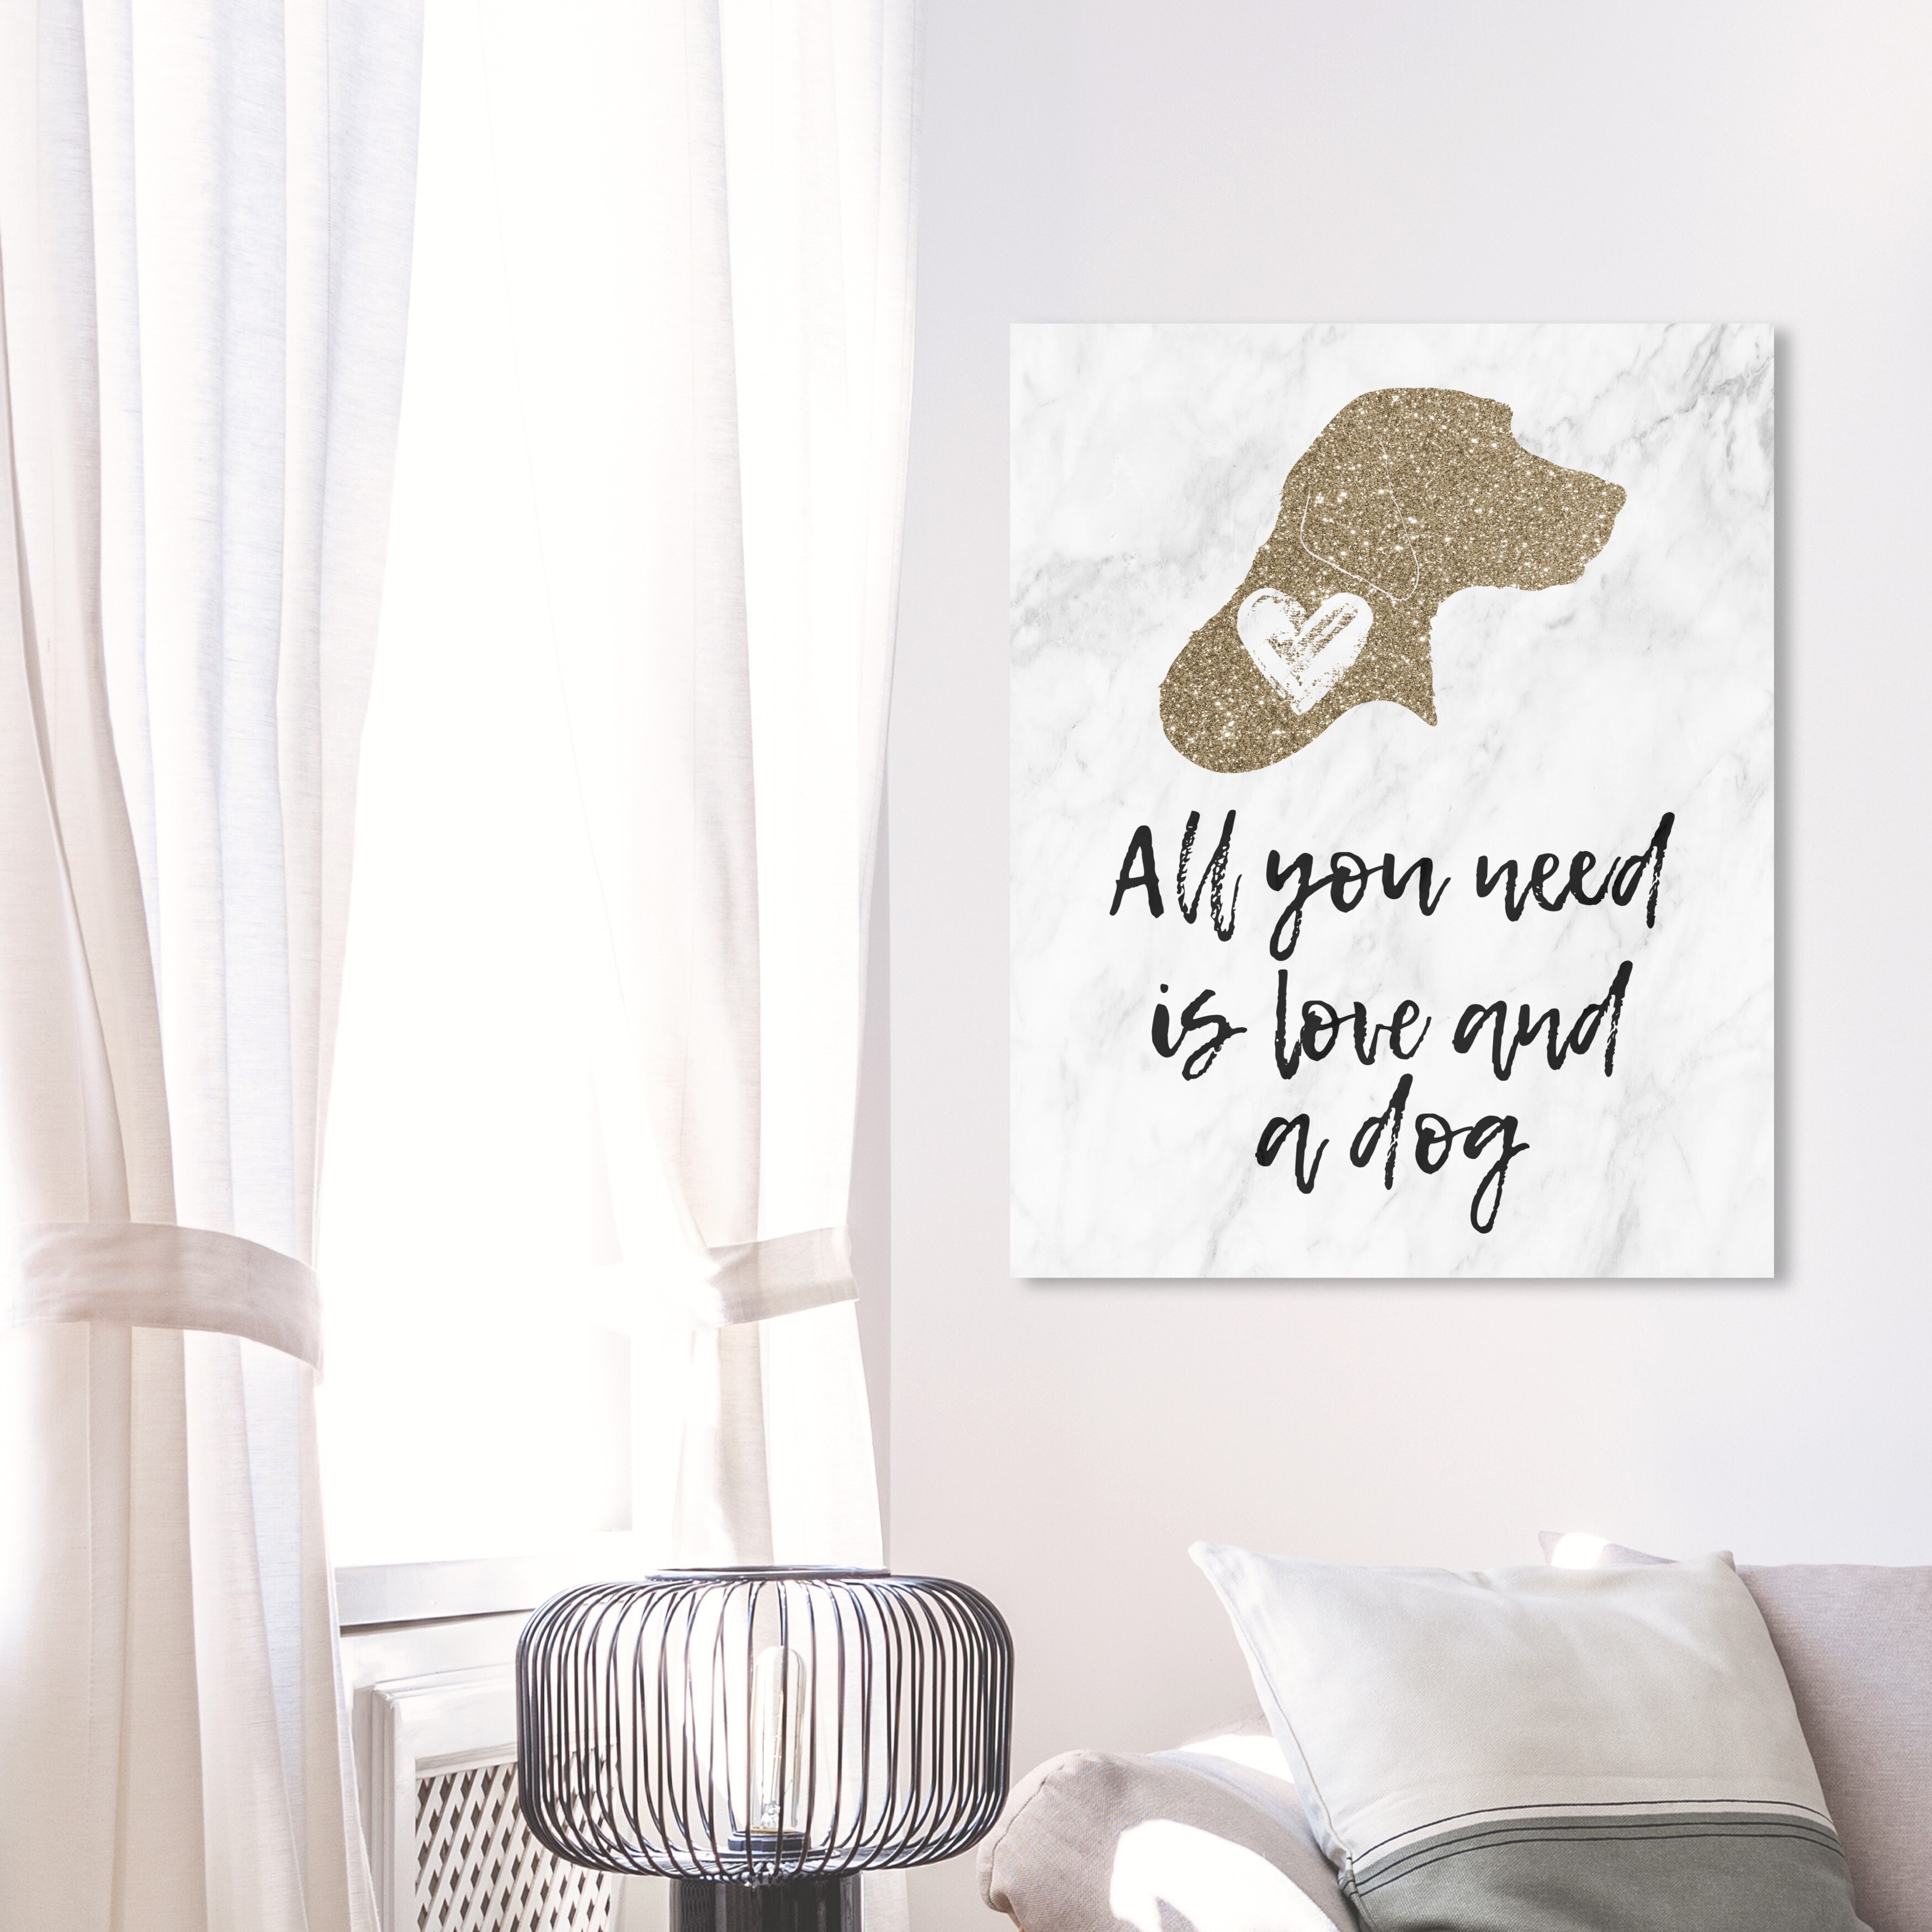 Oliver Gal 'Love Gold Letters' Typography and Quotes Wall Art